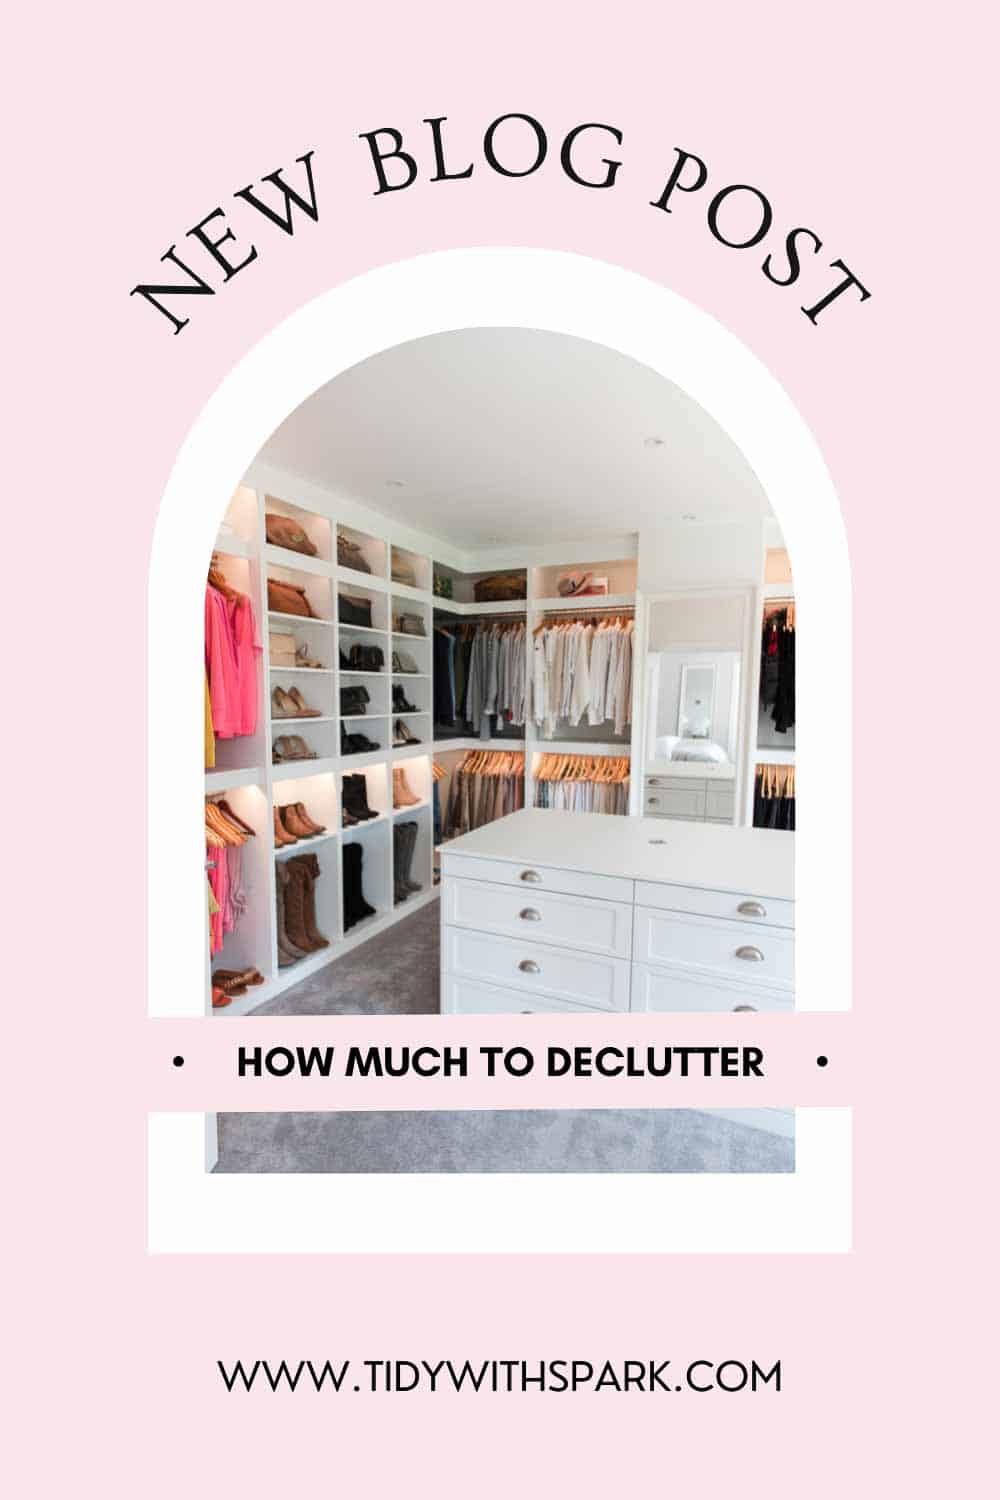 Promotional image for How much to keep when decluttering for tidy with spark blog